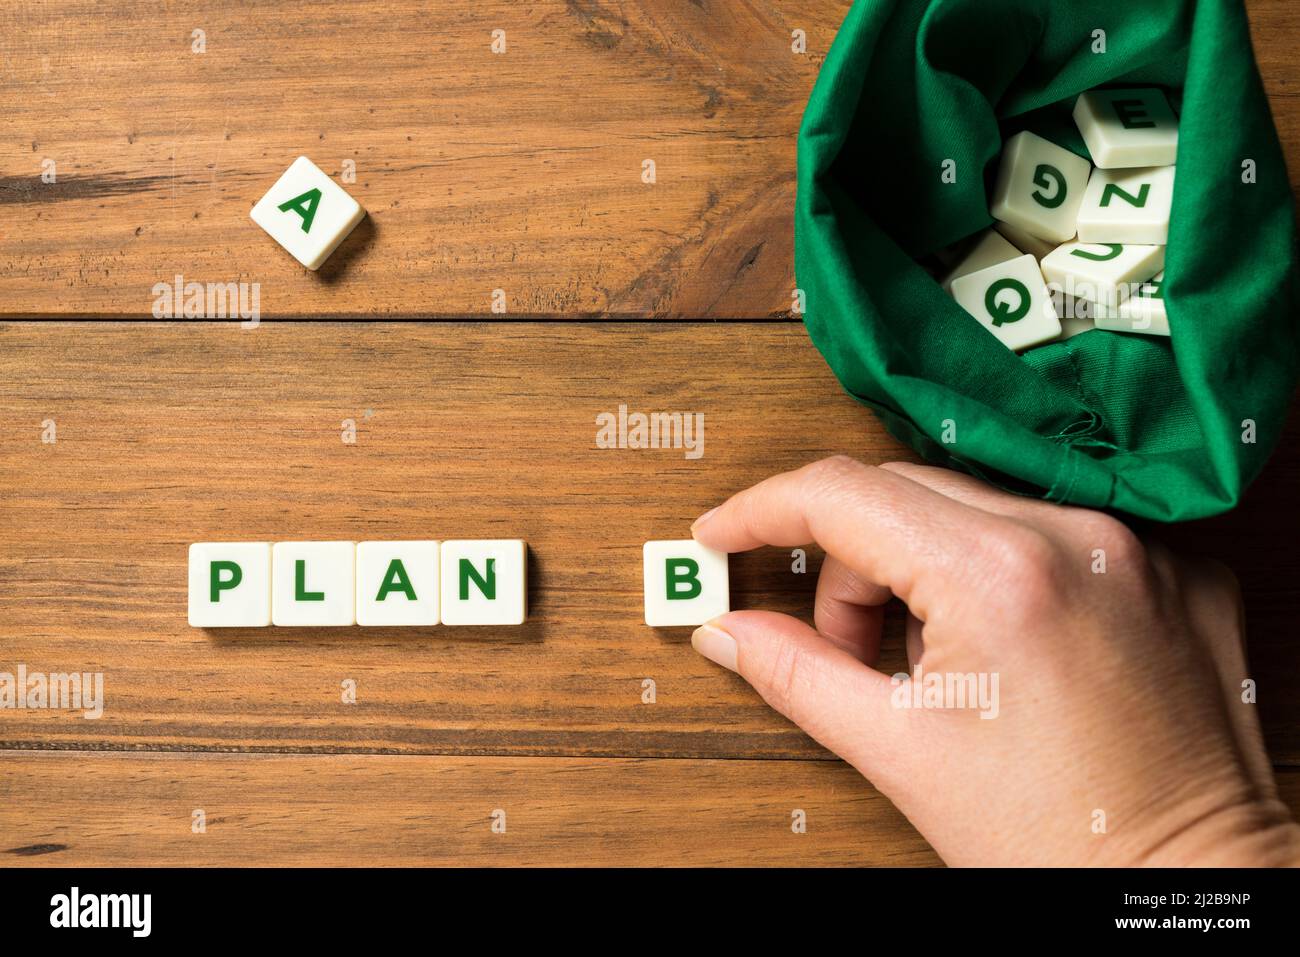 A hand placing a piece with the letter B next to the word PLAN, next to a bag full of letters. A piece with the letter A appears displaced. Concept of Stock Photo